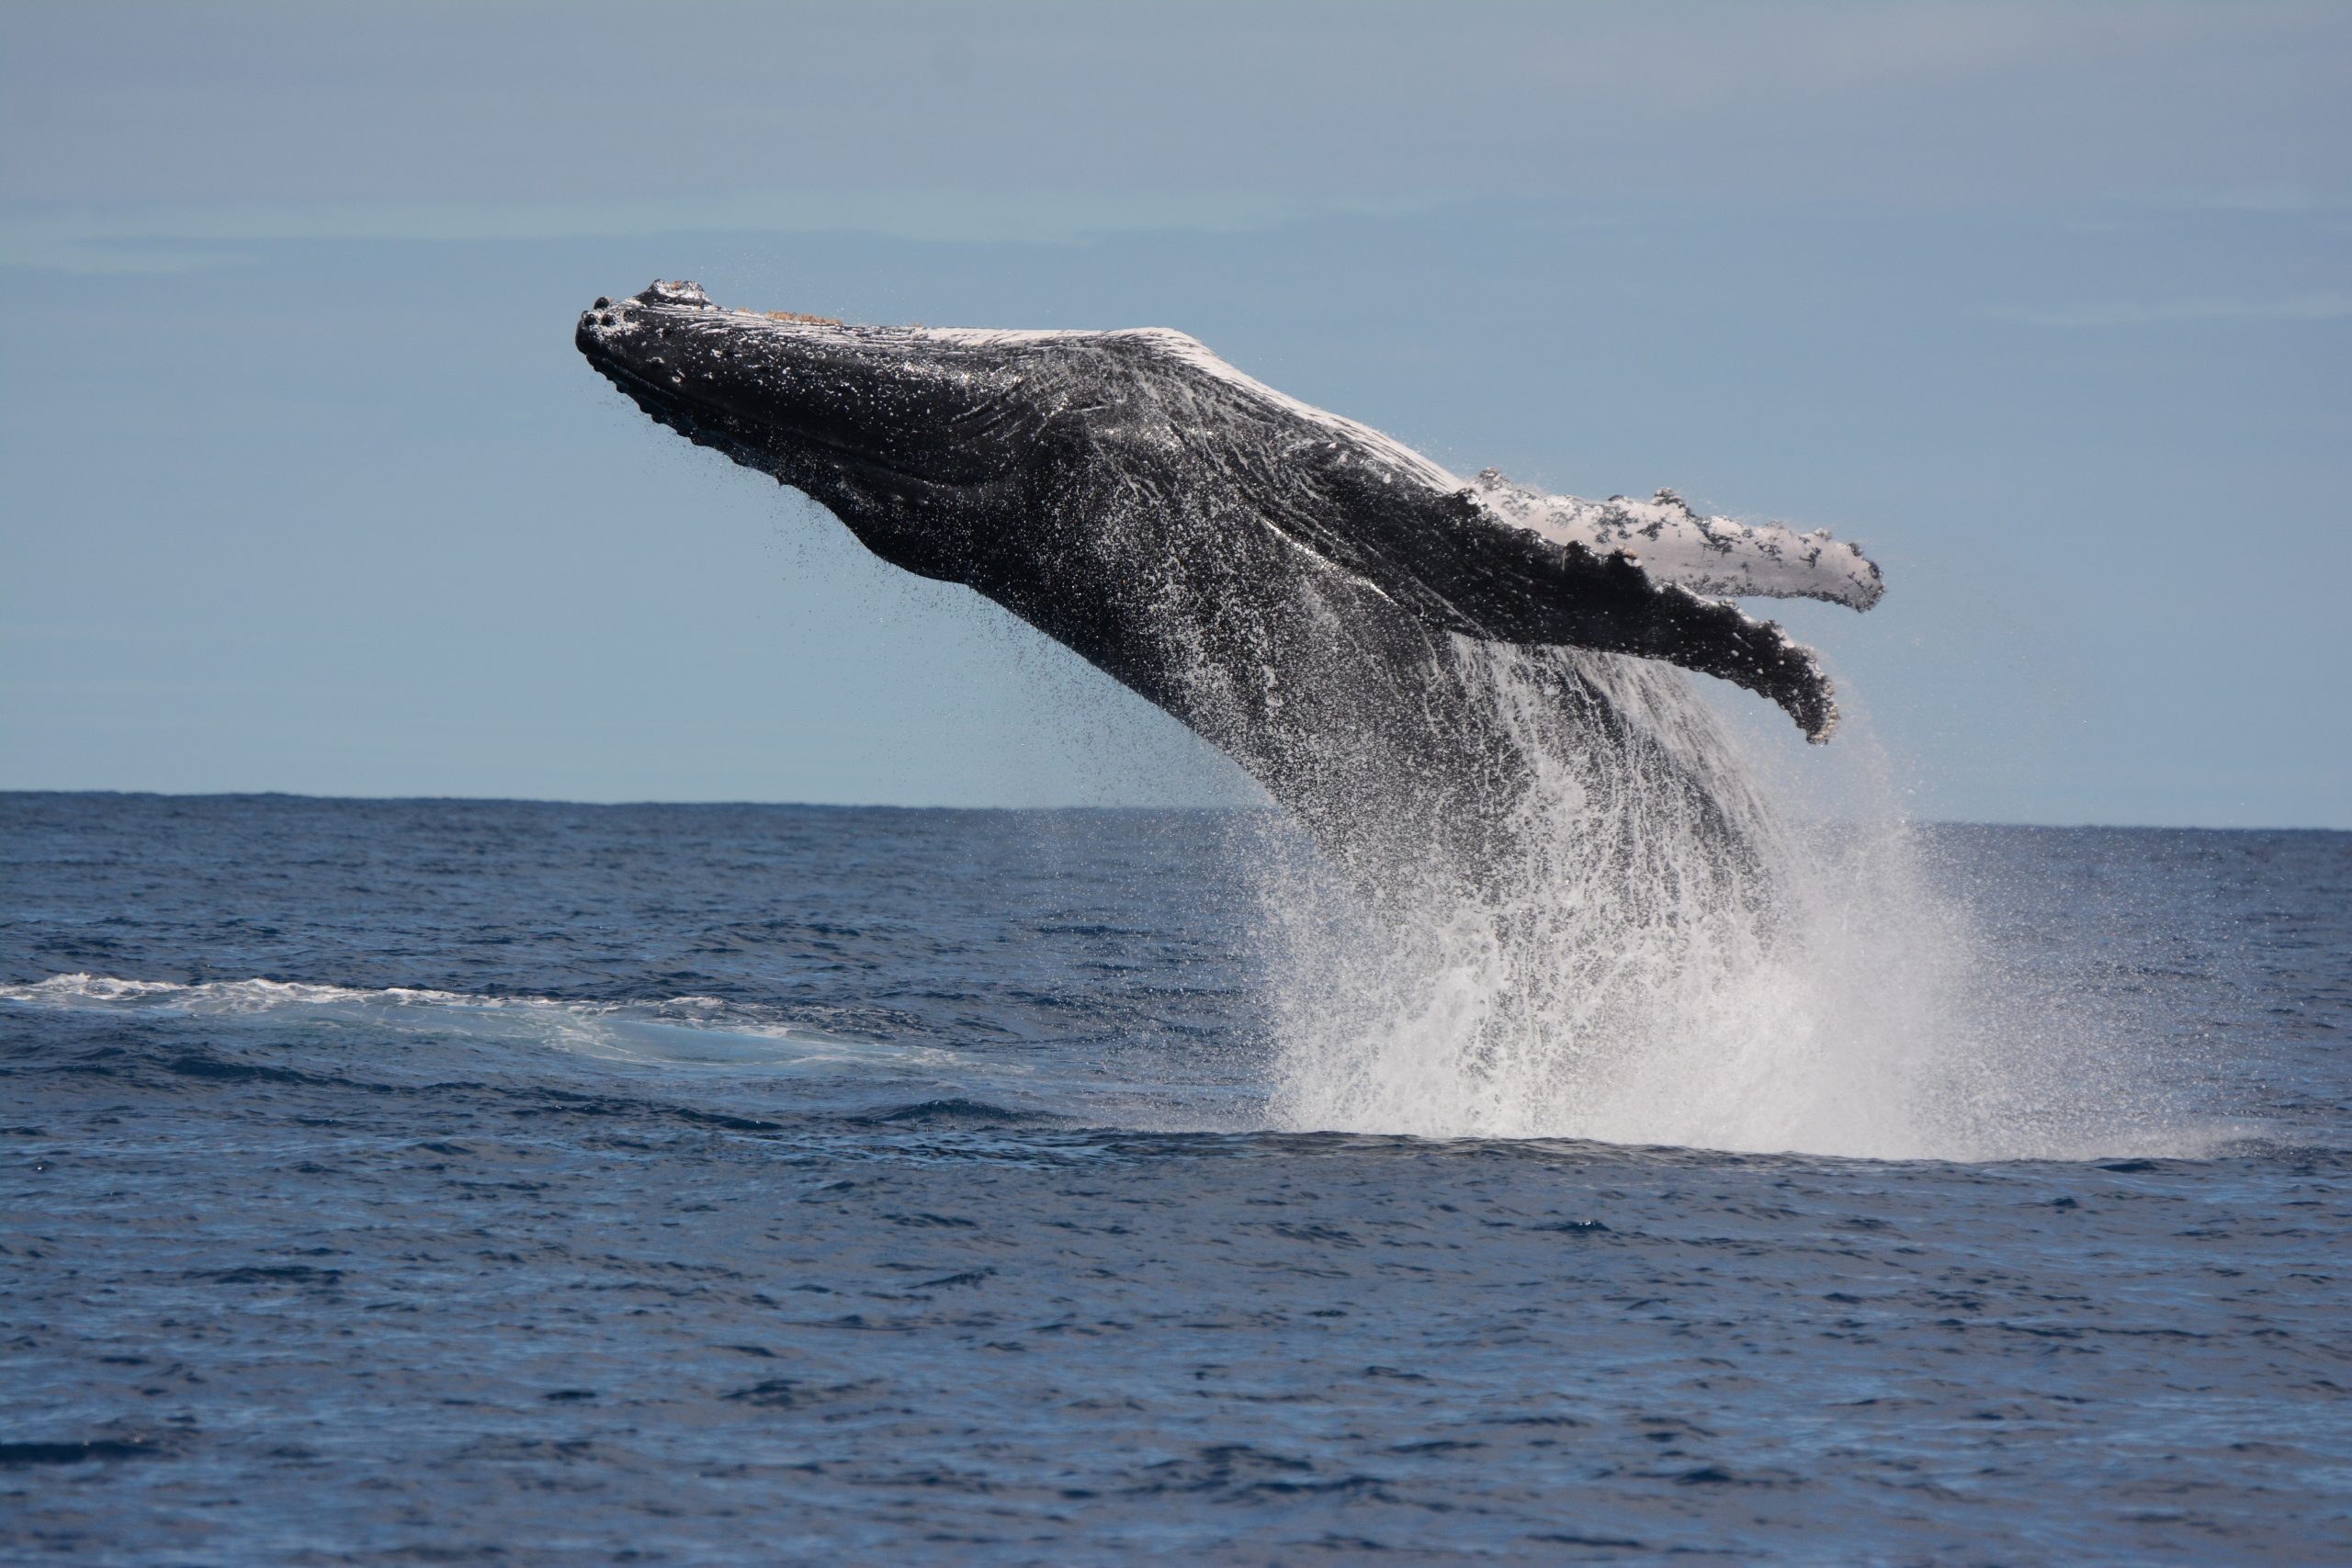 Humpback whale from Réunion